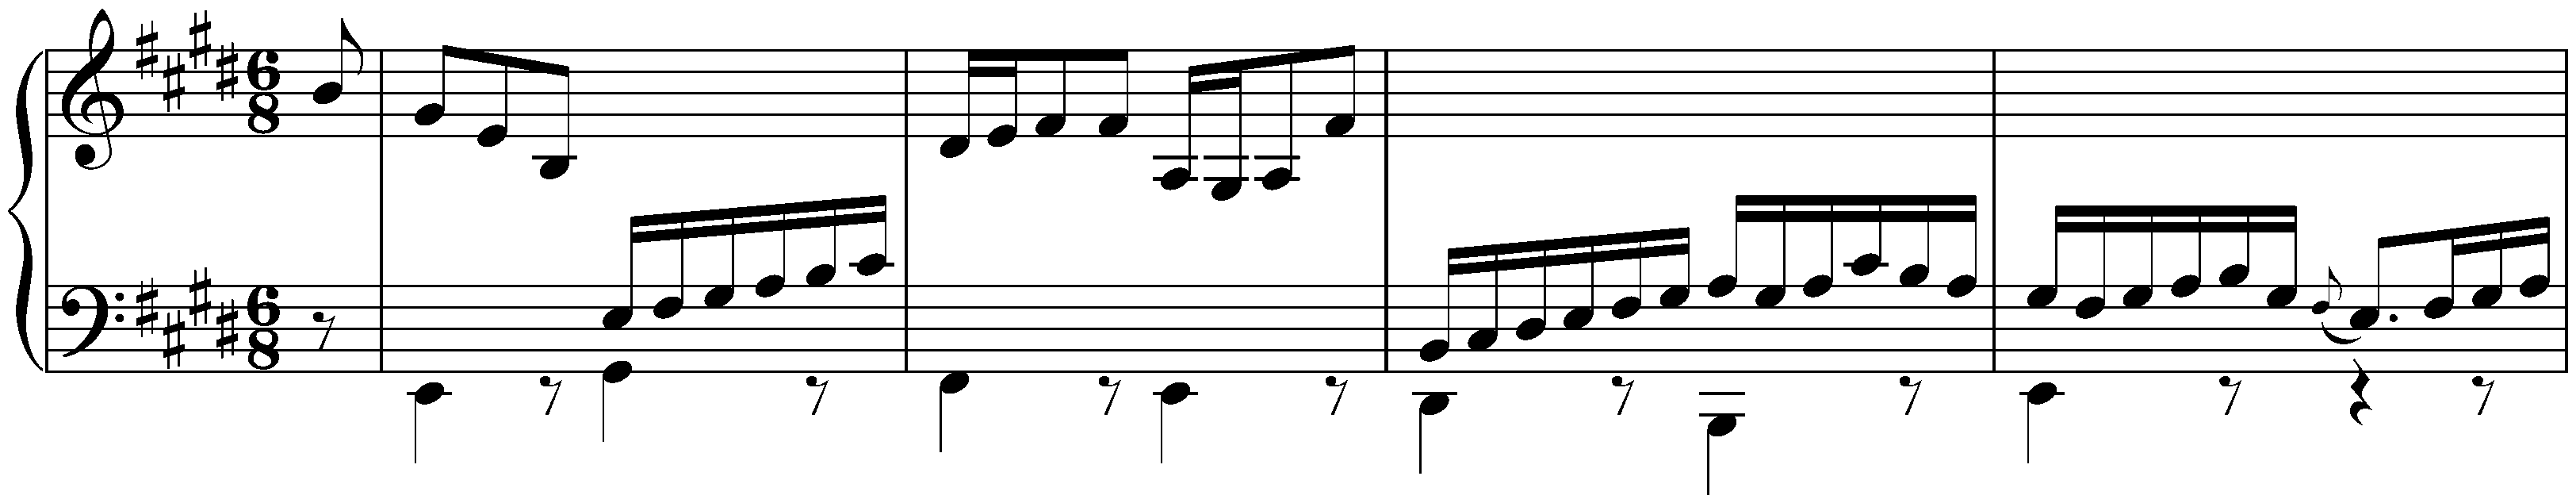 Suite in E major, BWV 1006; 6. Gigue